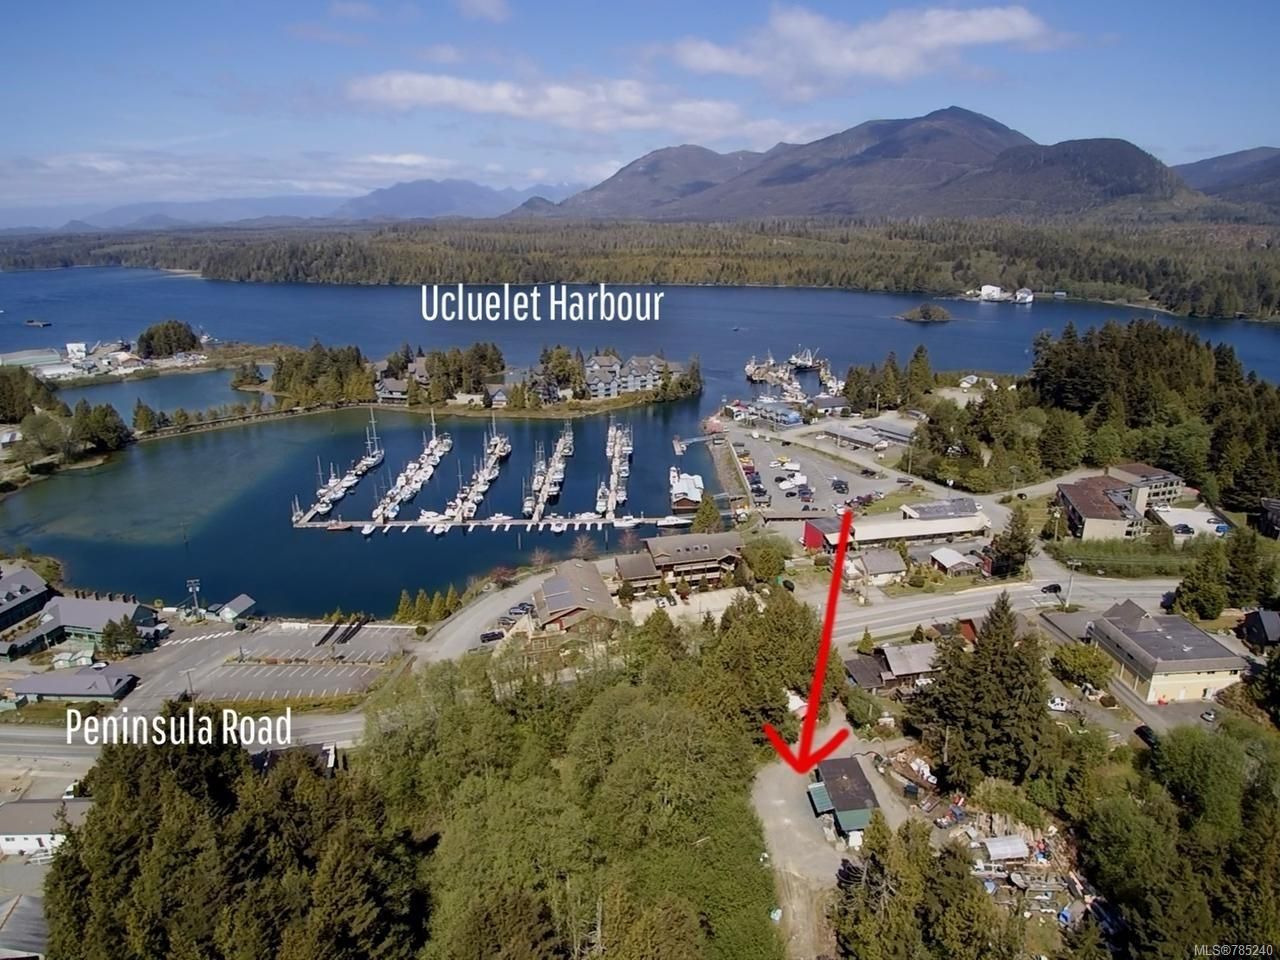 Main Photo: 1914 Peninsula Rd in UCLUELET: PA Ucluelet Retail for sale (Port Alberni)  : MLS®# 785240